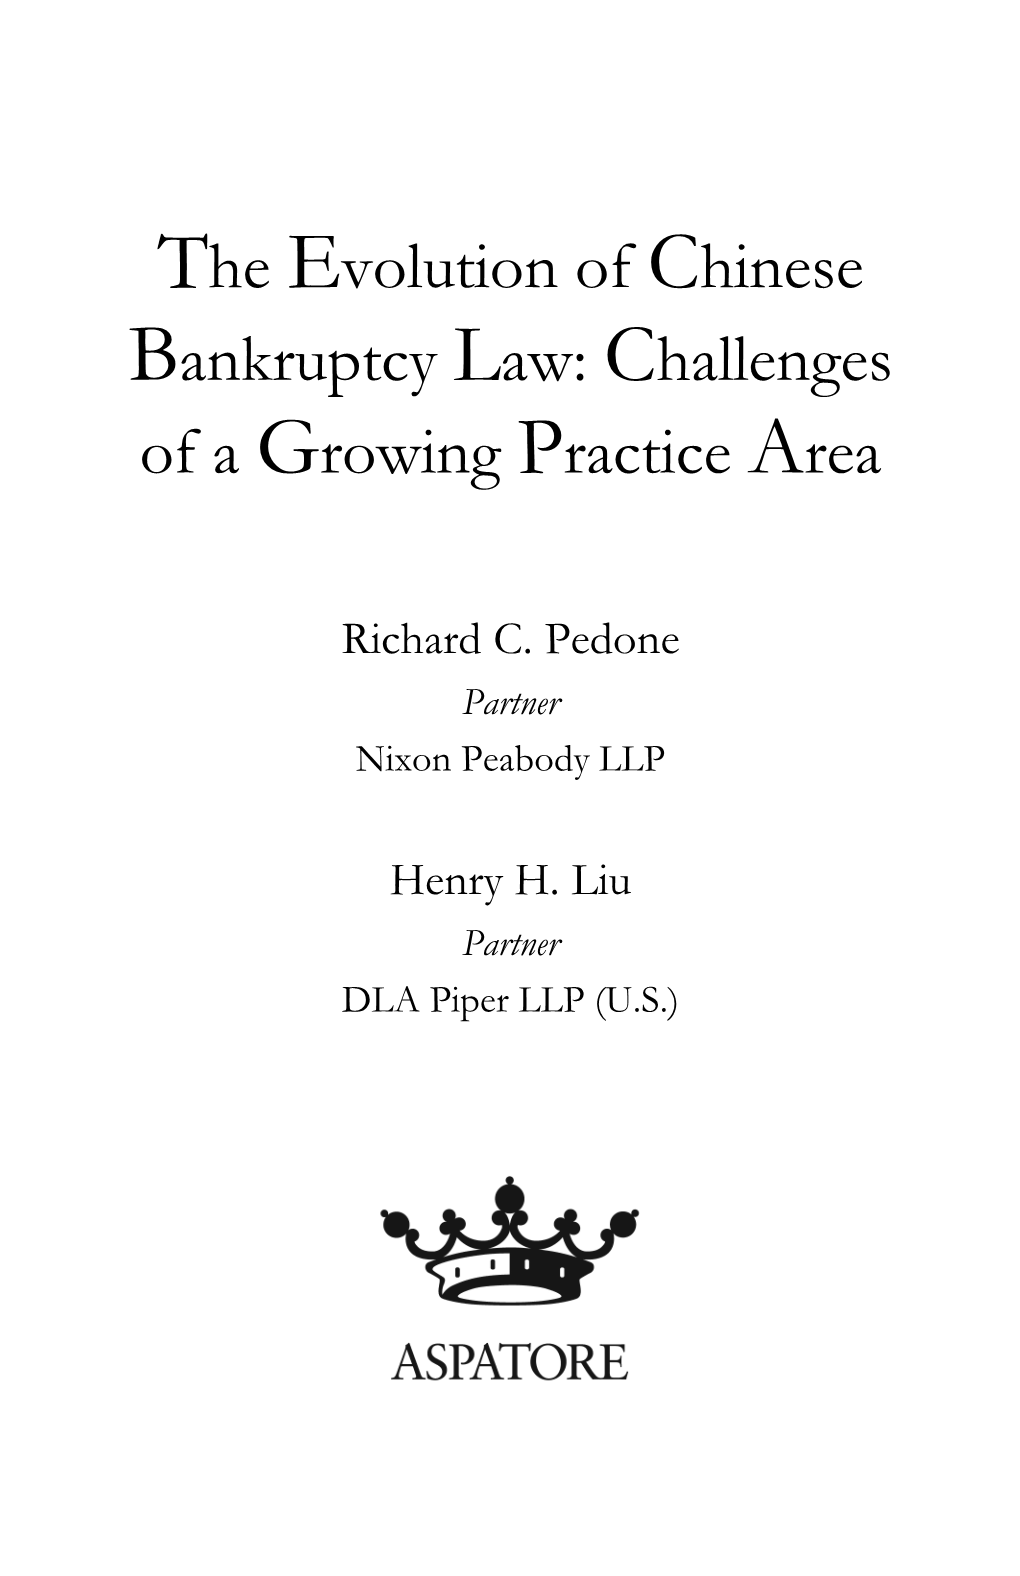 The Evolution of Chinese Bankruptcy Law: Challenges of a Growing Practice Area